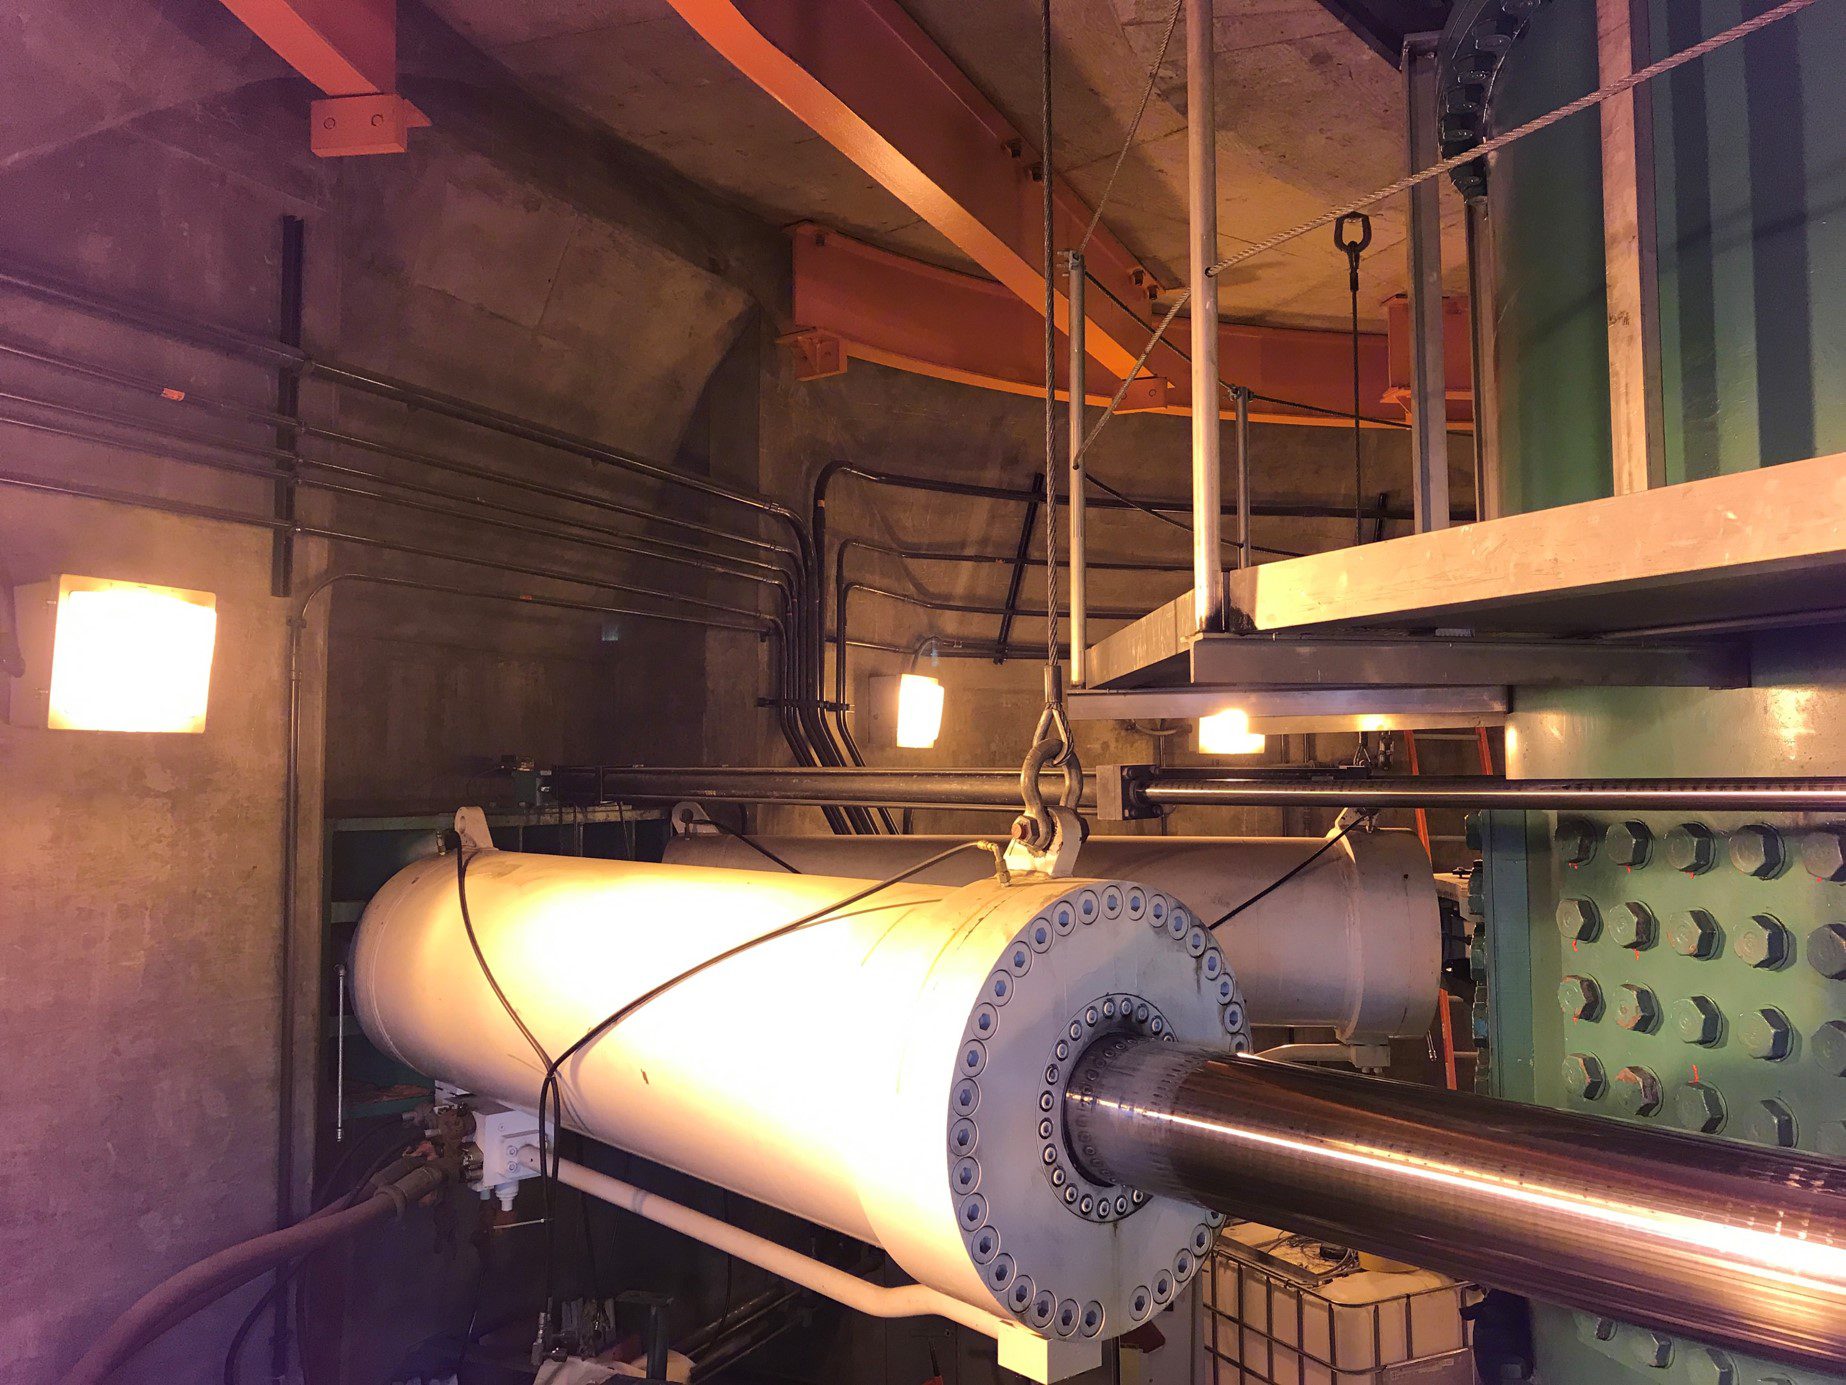 This 15,000-pound hydraulic cylinder is one of the largest parts of the complex system used to lift and turn the bridge so it can be opened for passing ships. The hydraulic cylinder is shown inside the bridge, with lights and other bridge equipment in the background.